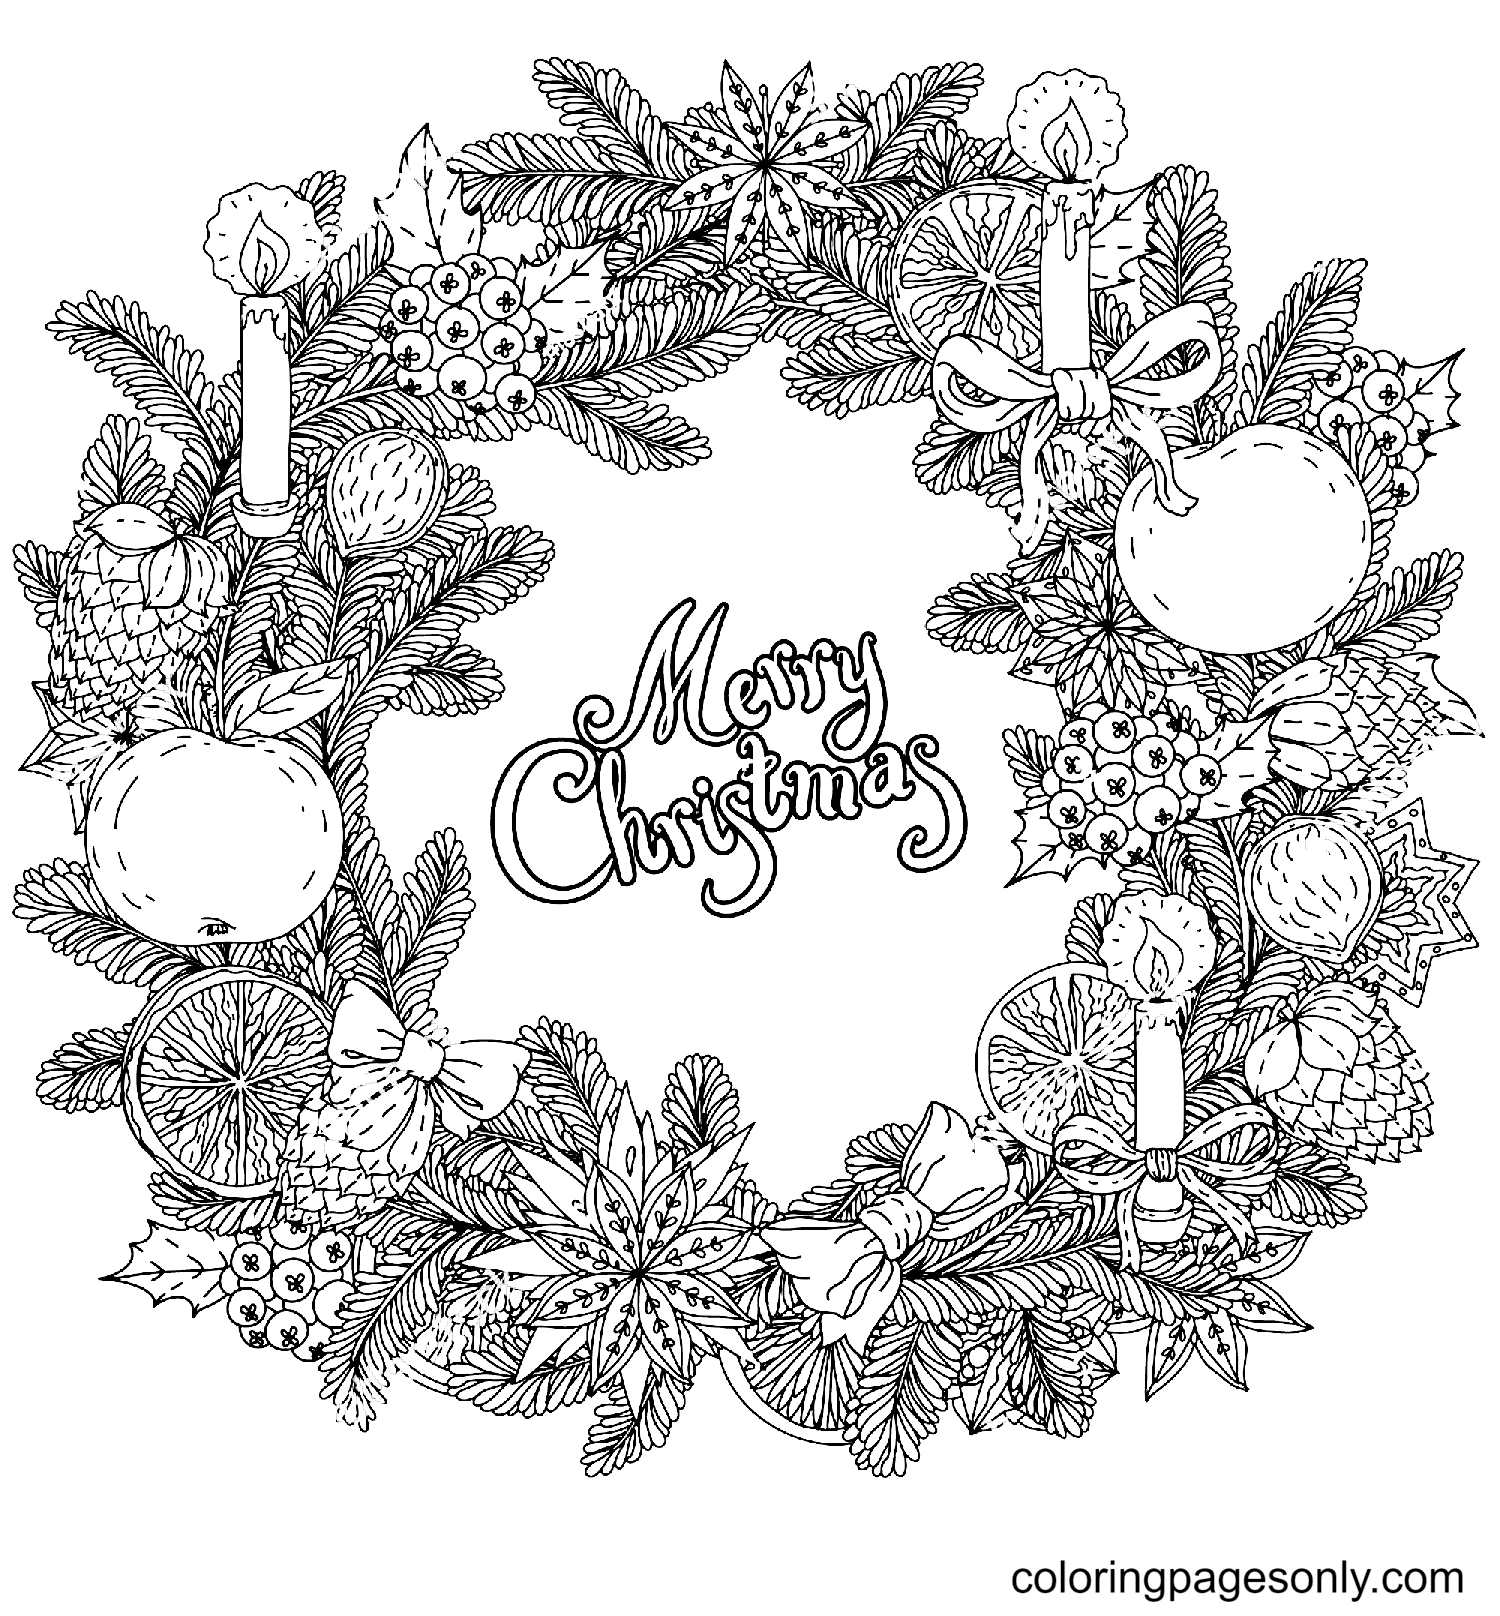 Mandala Christmas Wreath with Ornaments Coloring Page